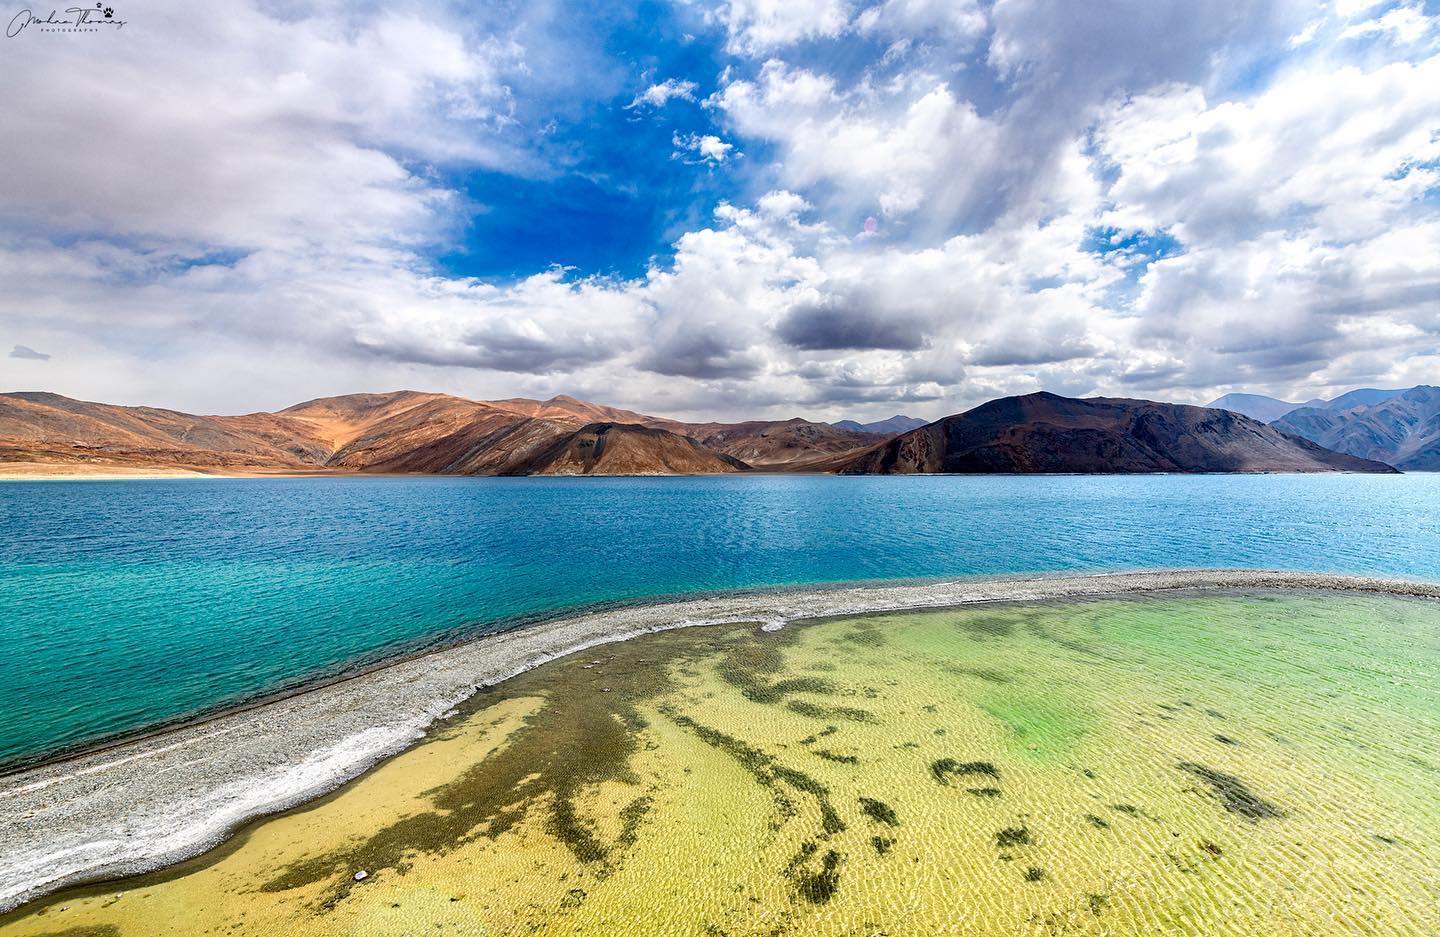 Pangong Lake - One of the best instagrammable Locations in India